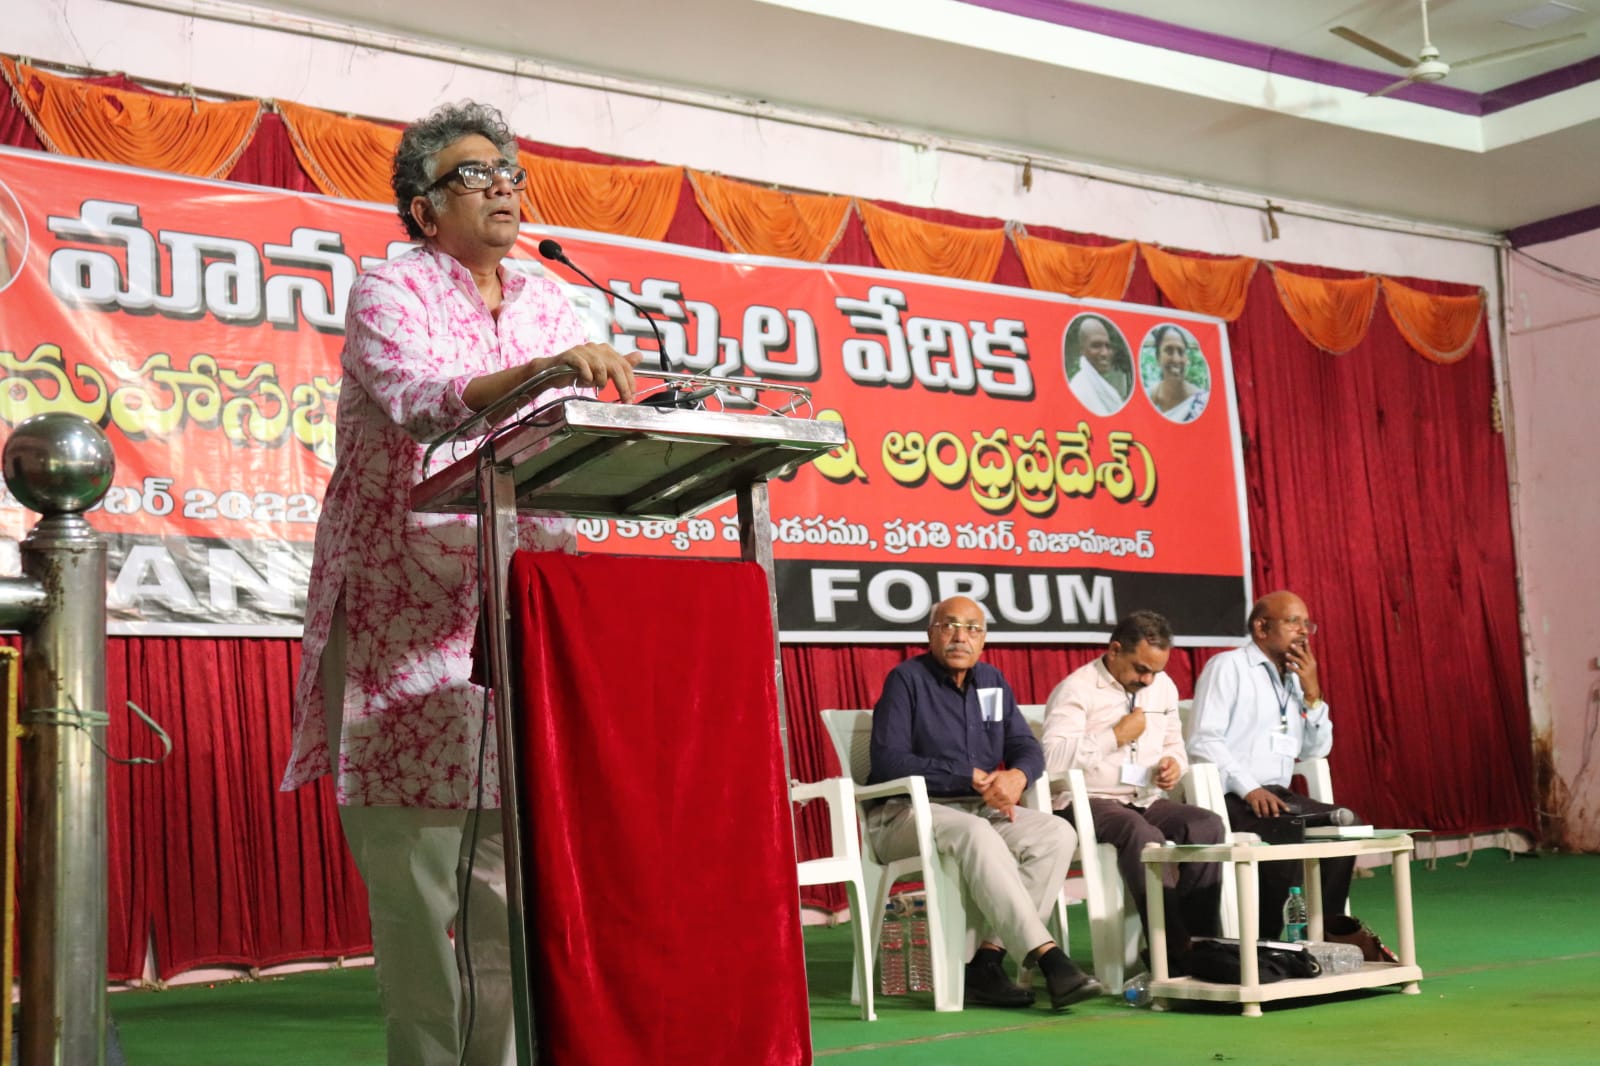 Aakar Patel speaks at the ninth biennial conference of the Human Rights Forum (HRF) commenced in Nizamabad, Telangana, on 17 December